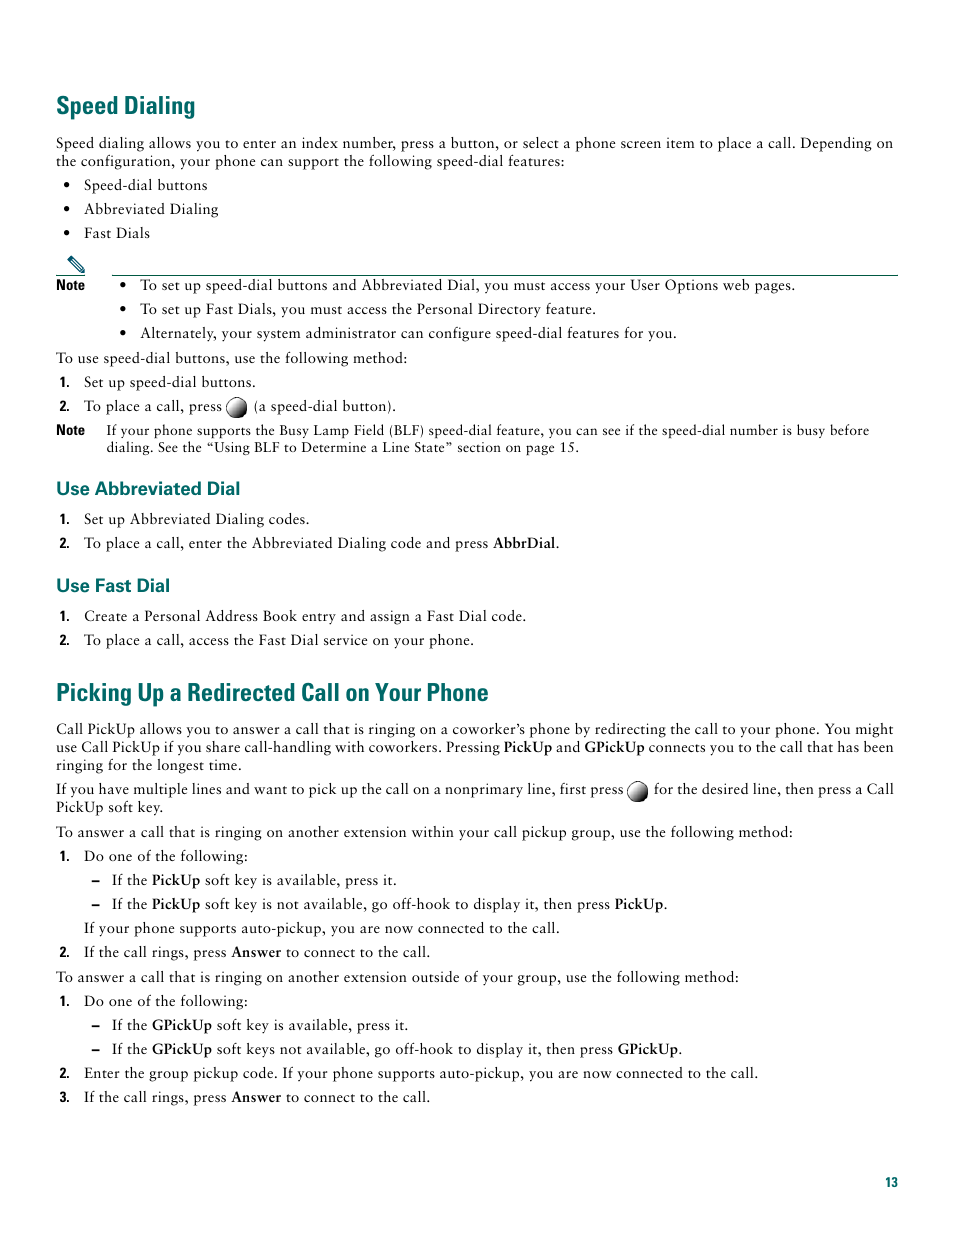 Speed dialing, Use abbreviated dial, Use fast dial | Picking up a redirected call on your phone | Cisco 7970G User Manual | Page 13 / 20